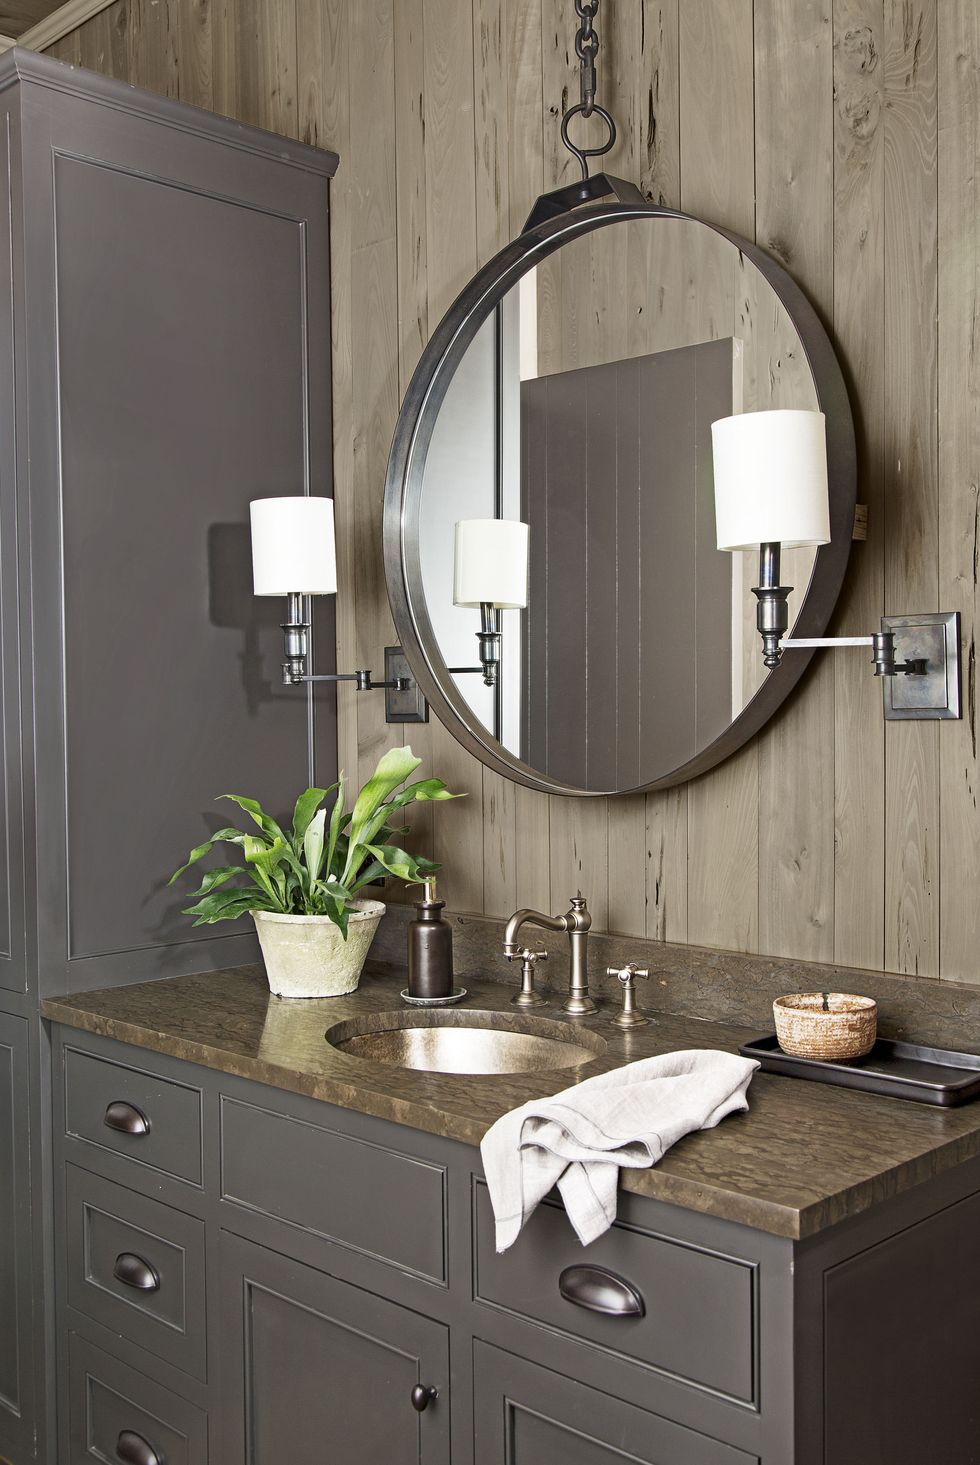 13 Things to Put on Bathroom Countertops